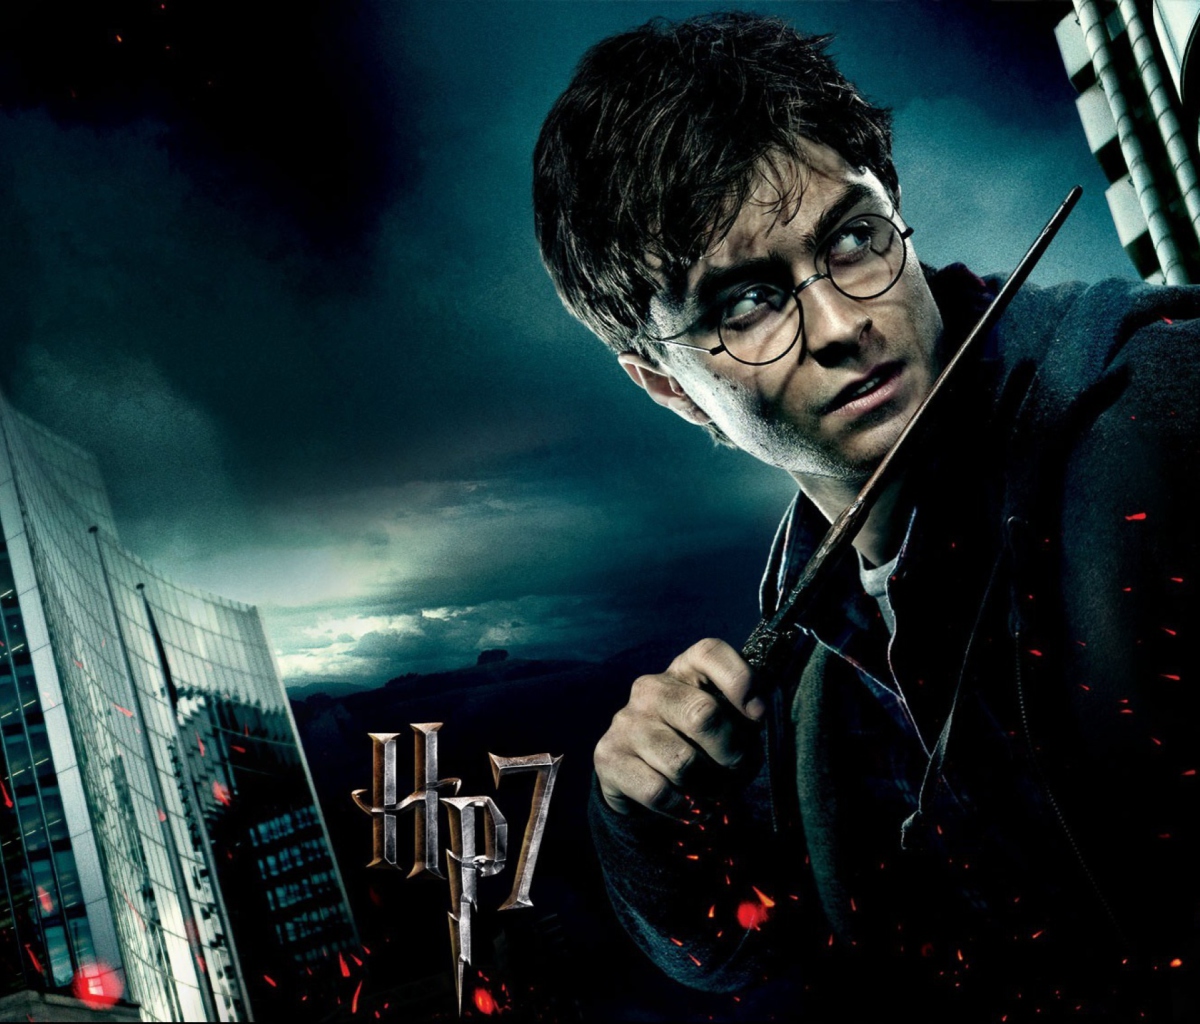 Harry Potter And The Deathly Hallows Part-1 wallpaper 1200x1024